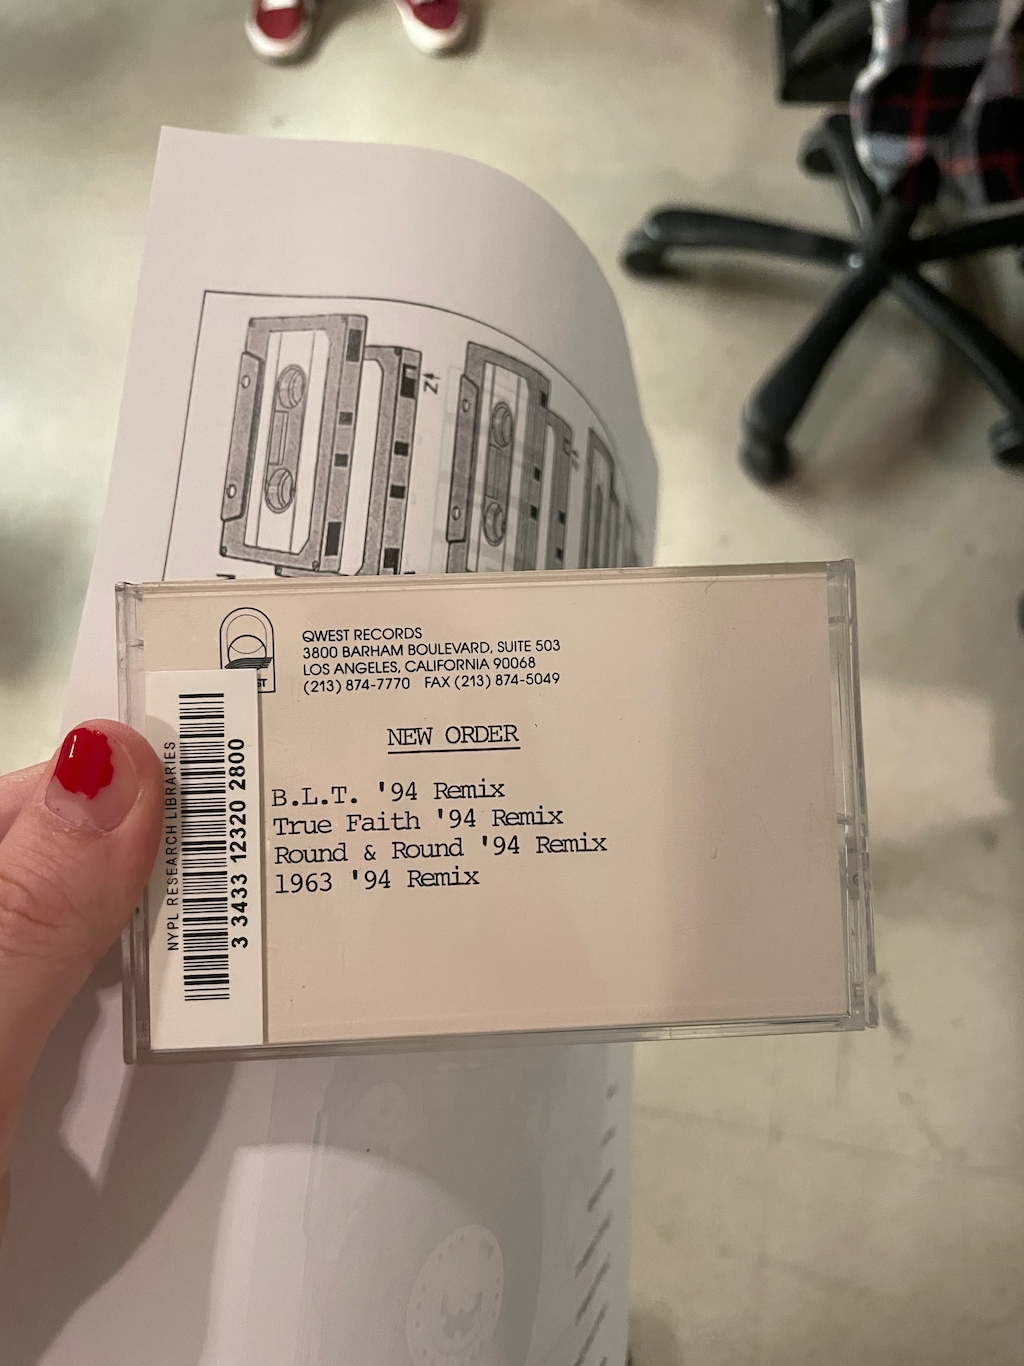 holding an archival object